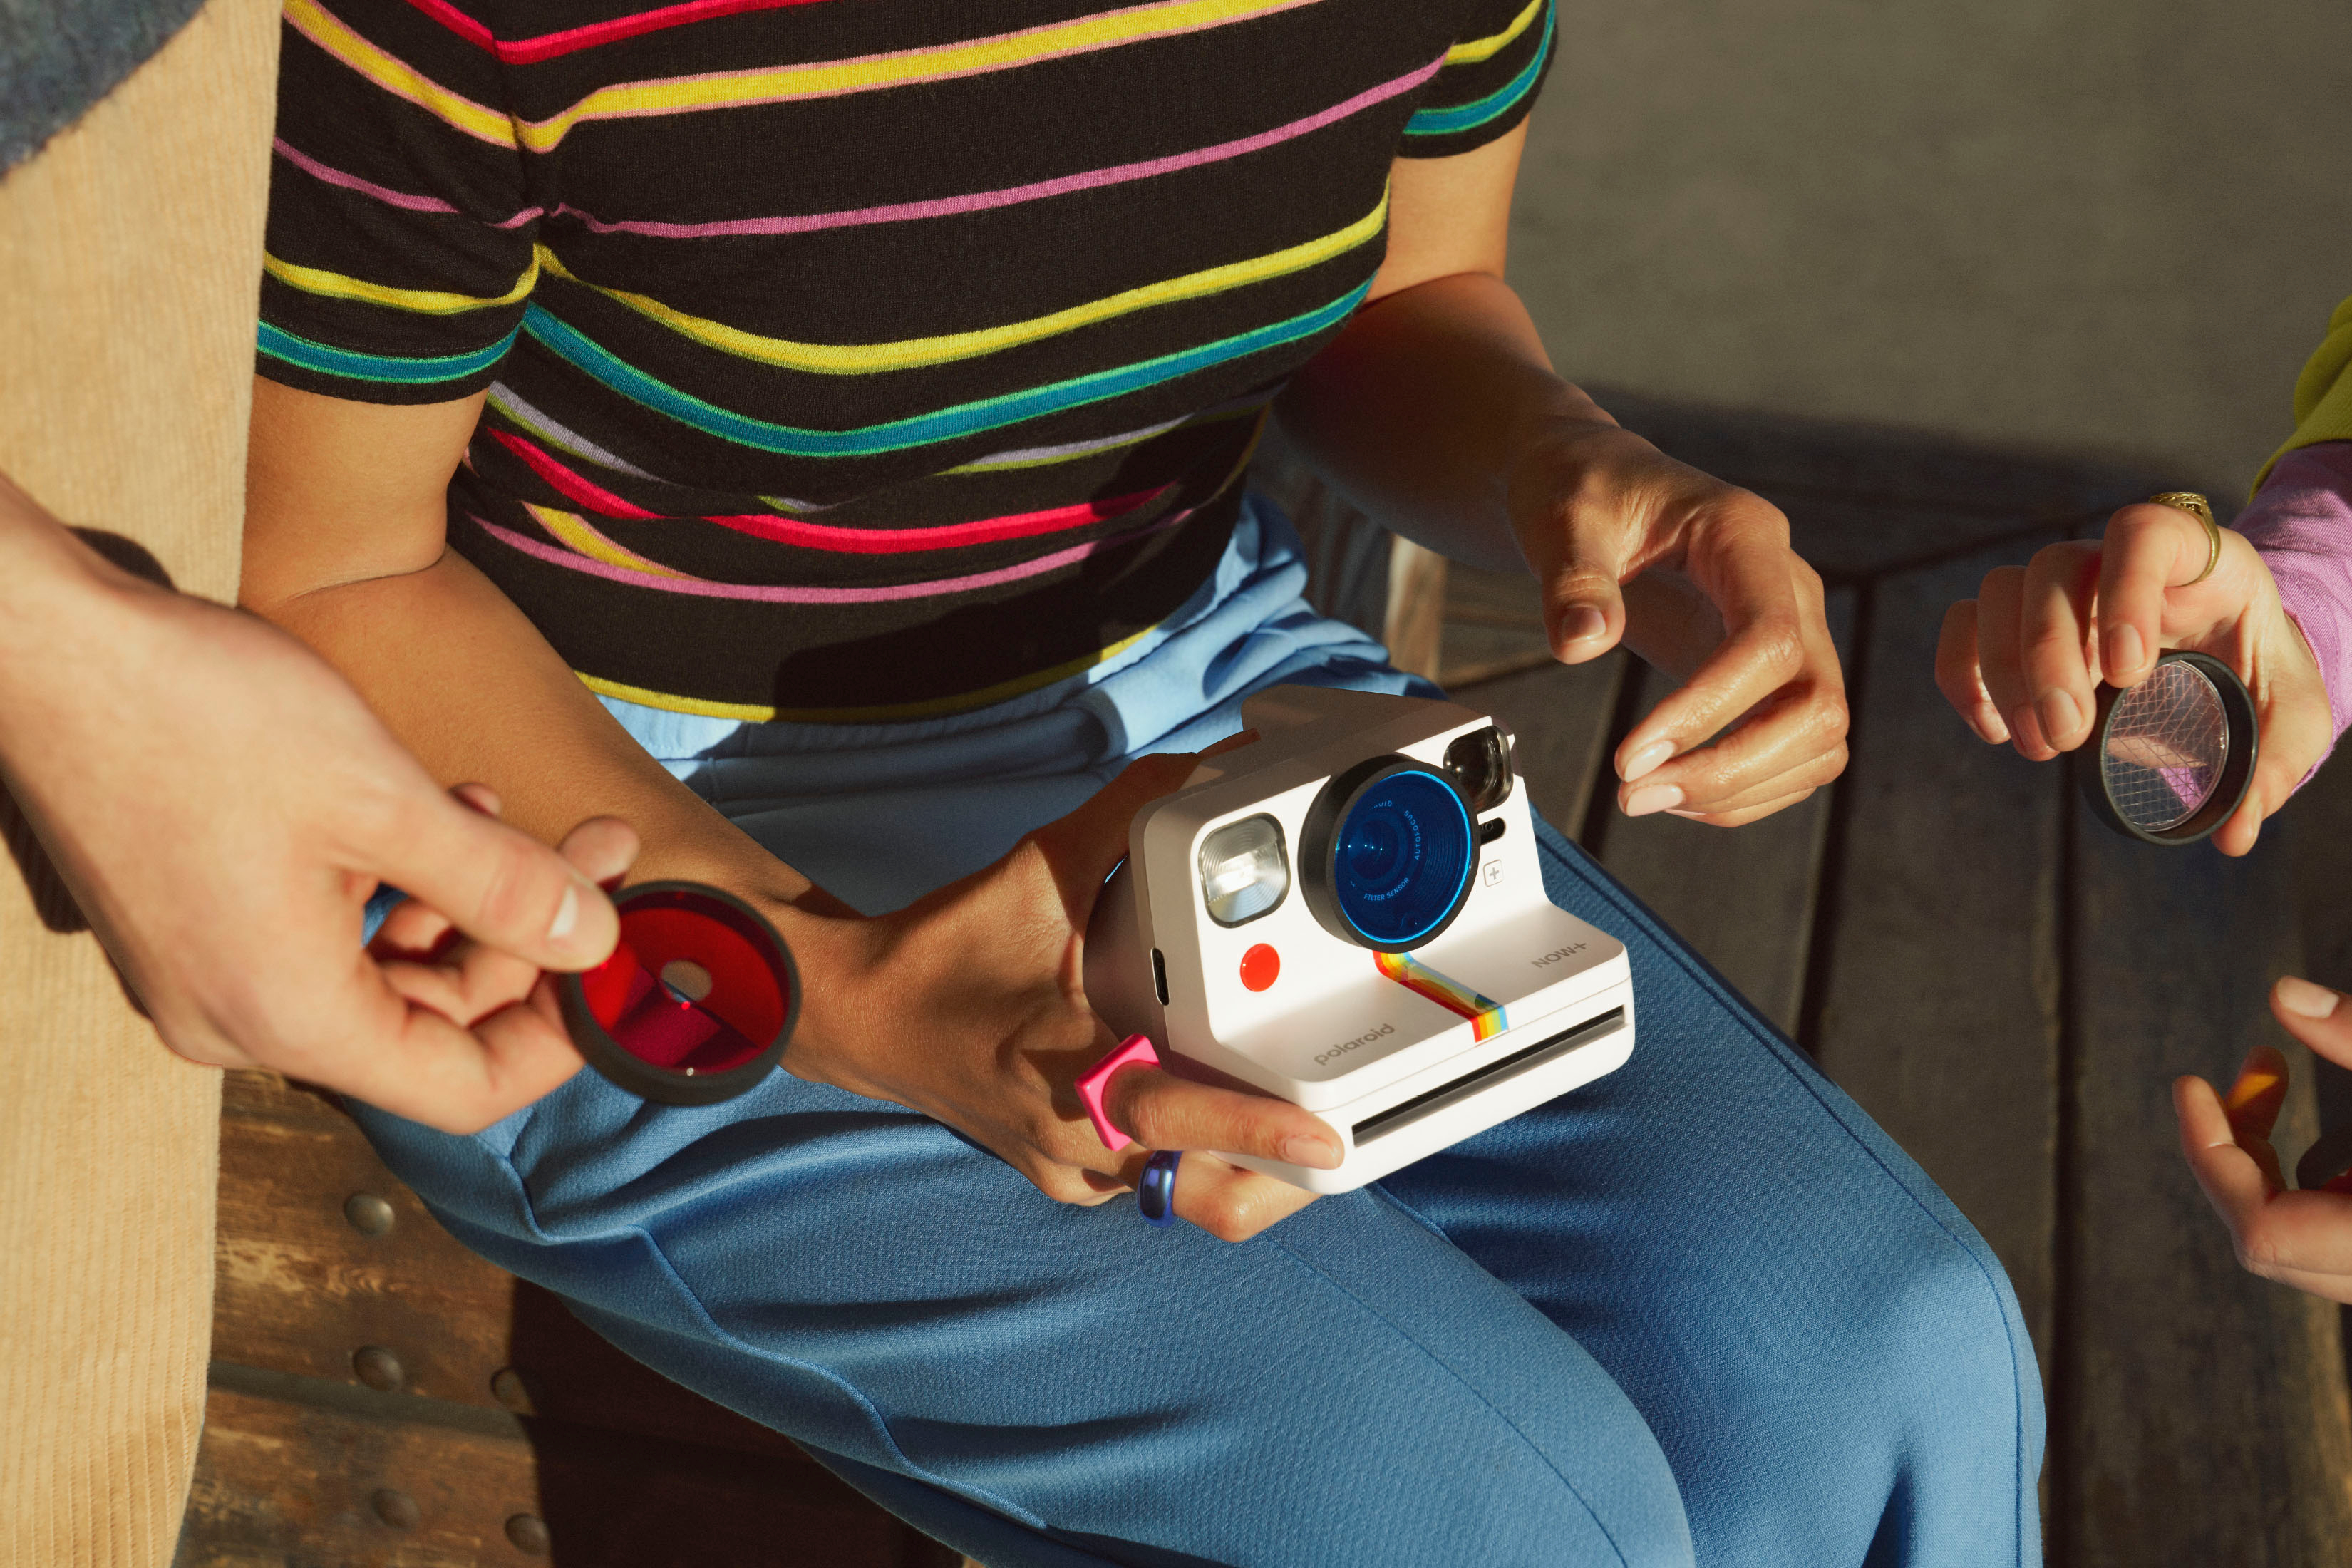 Polaroid Now Plus review: An analog instant camera bursting with